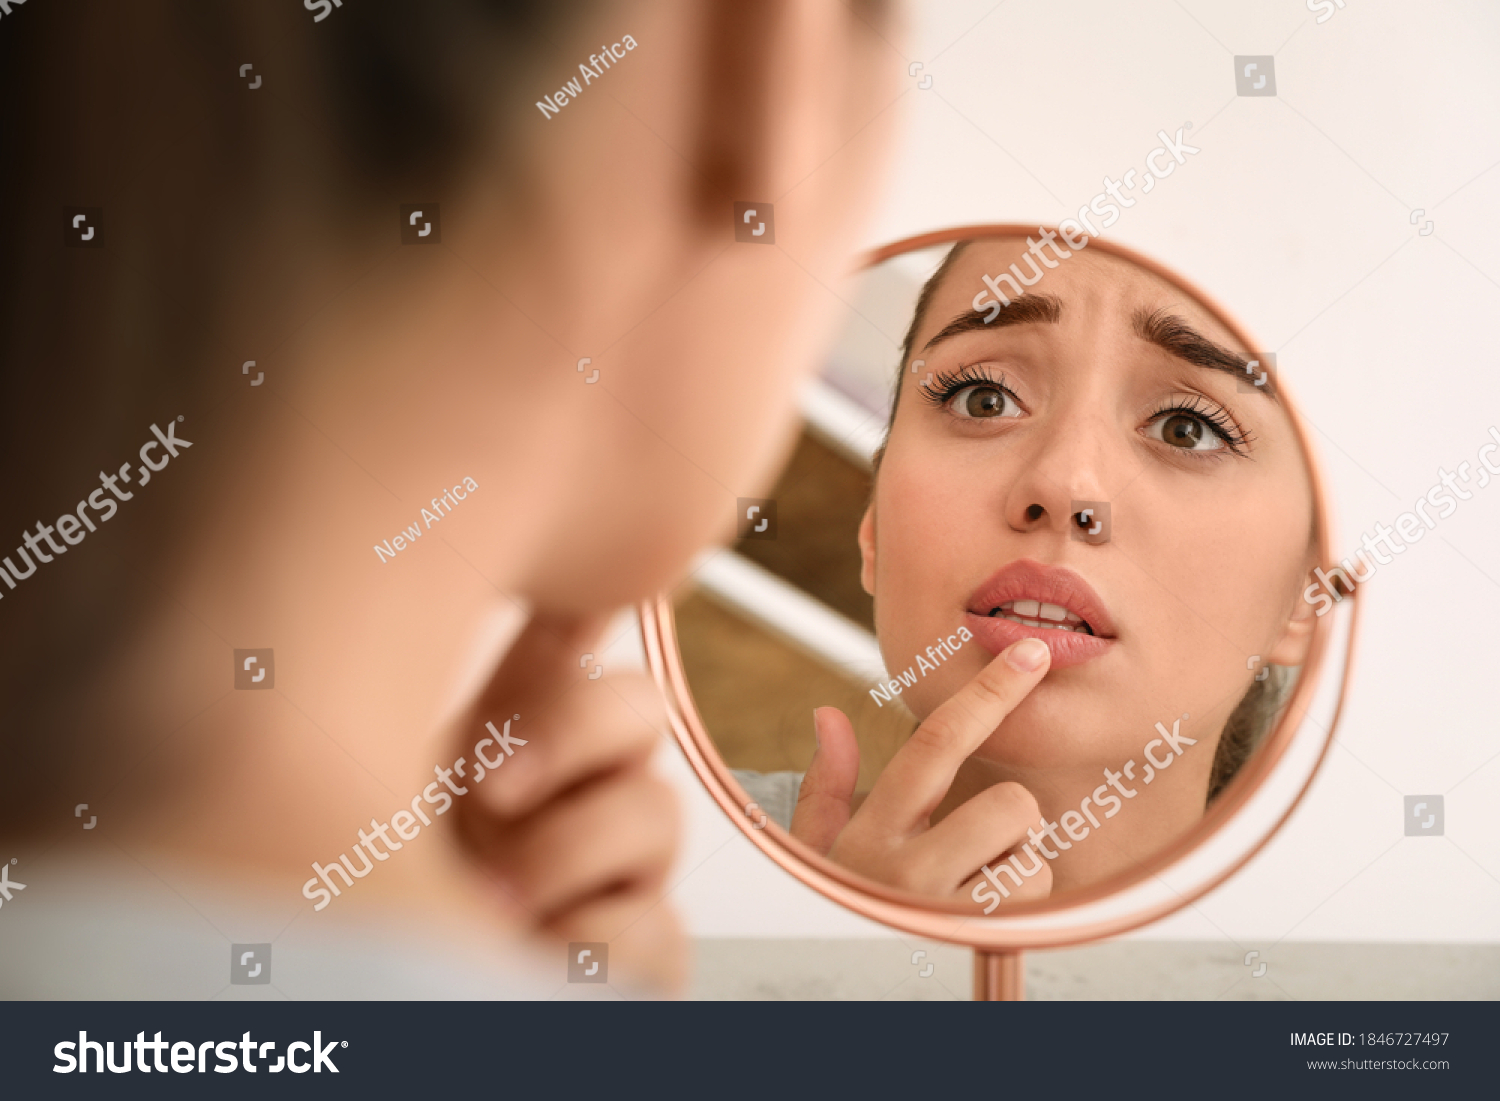 Emotional woman with herpes touching lips in front of mirror against light background #1846727497